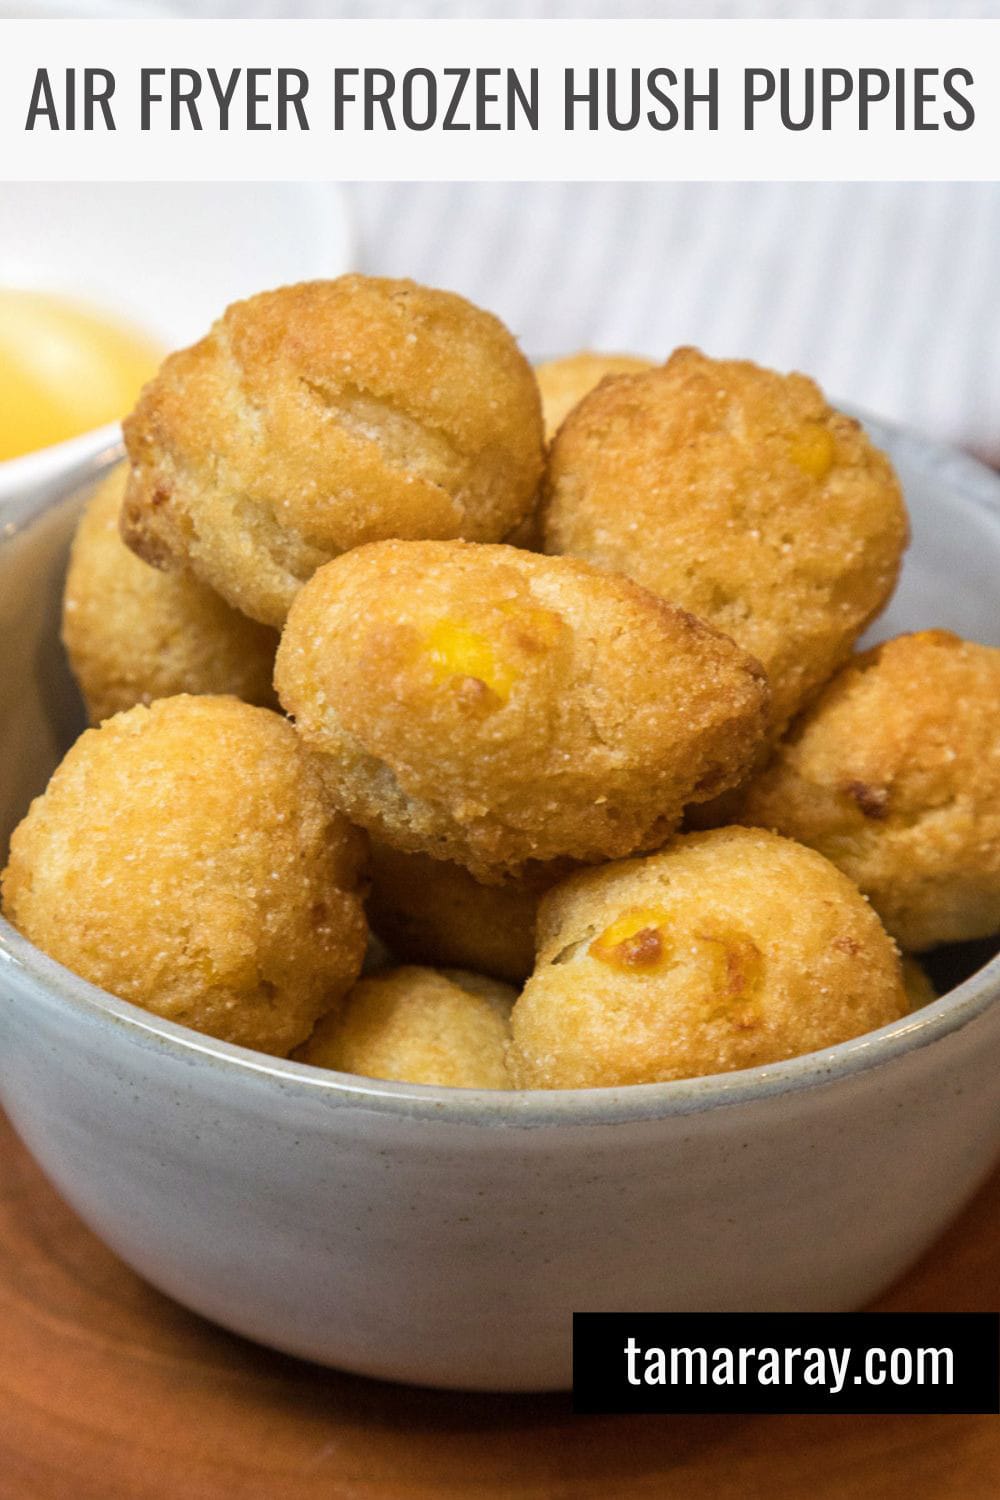 Pin image for frozen hush puppy recipe.